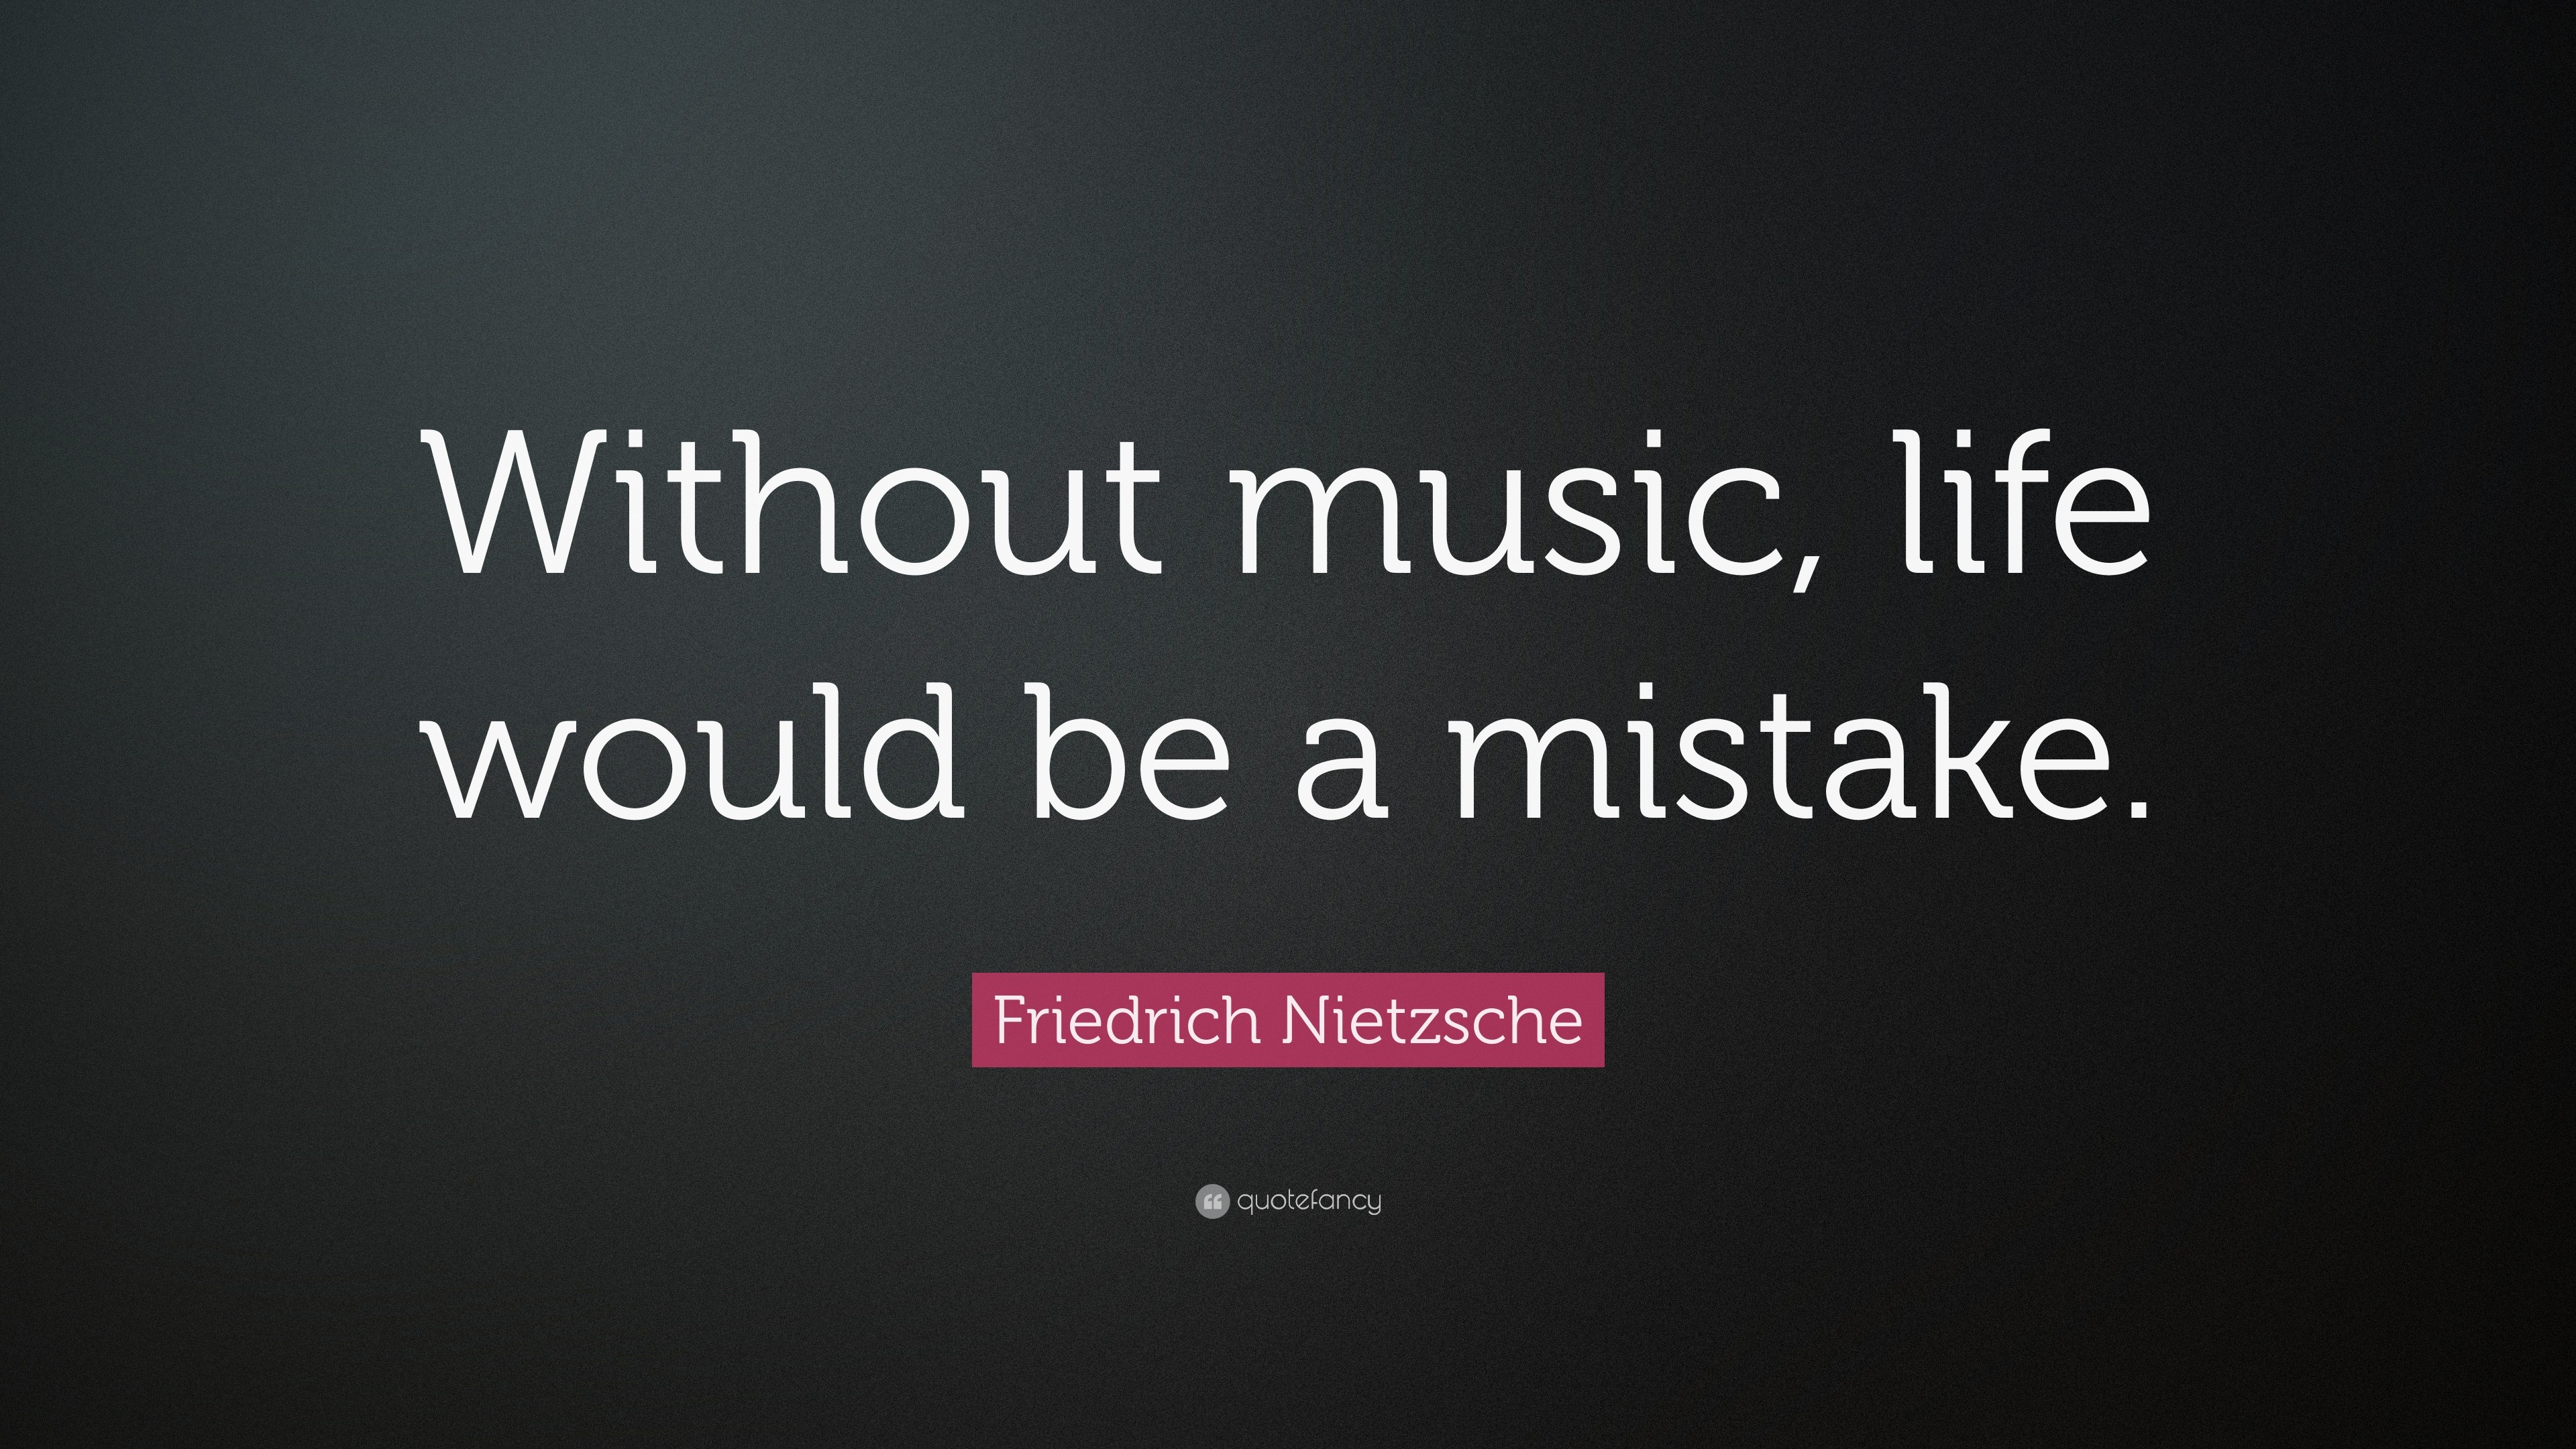 Friedrich Nietzsche Quote “Without music life would be a mistake ”